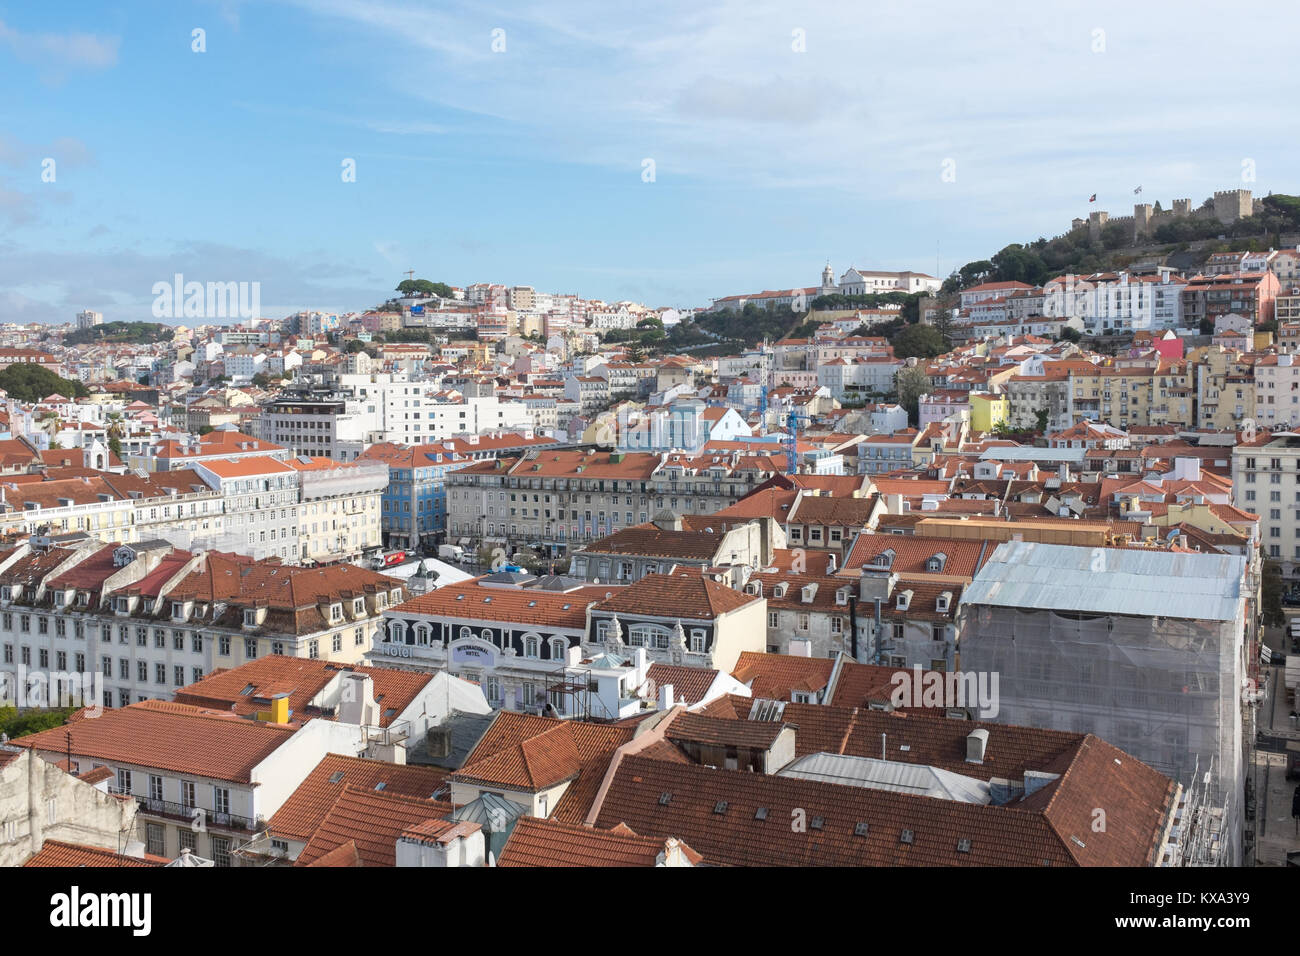 View over the rooftops of Lisbon, Portugal from the elevator de santa justa or santa just a lift which was built in 1902 to connect lower streets Stock Photo